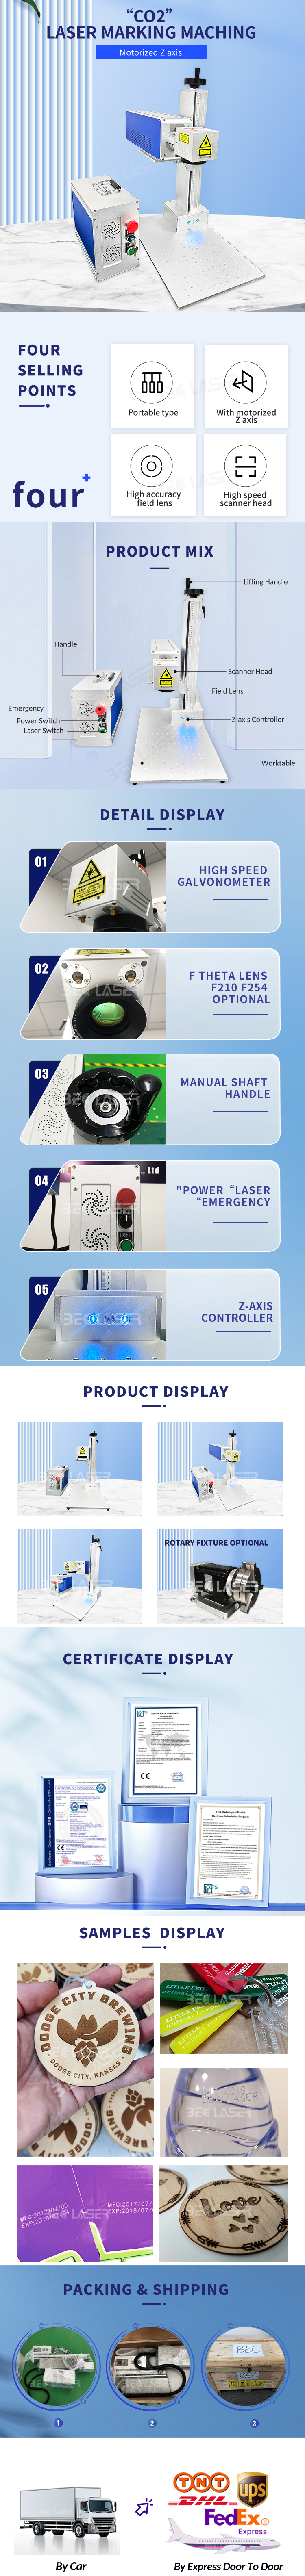 https://www.beclaser.com/co2-laser-marking-machine-portable-type-product/